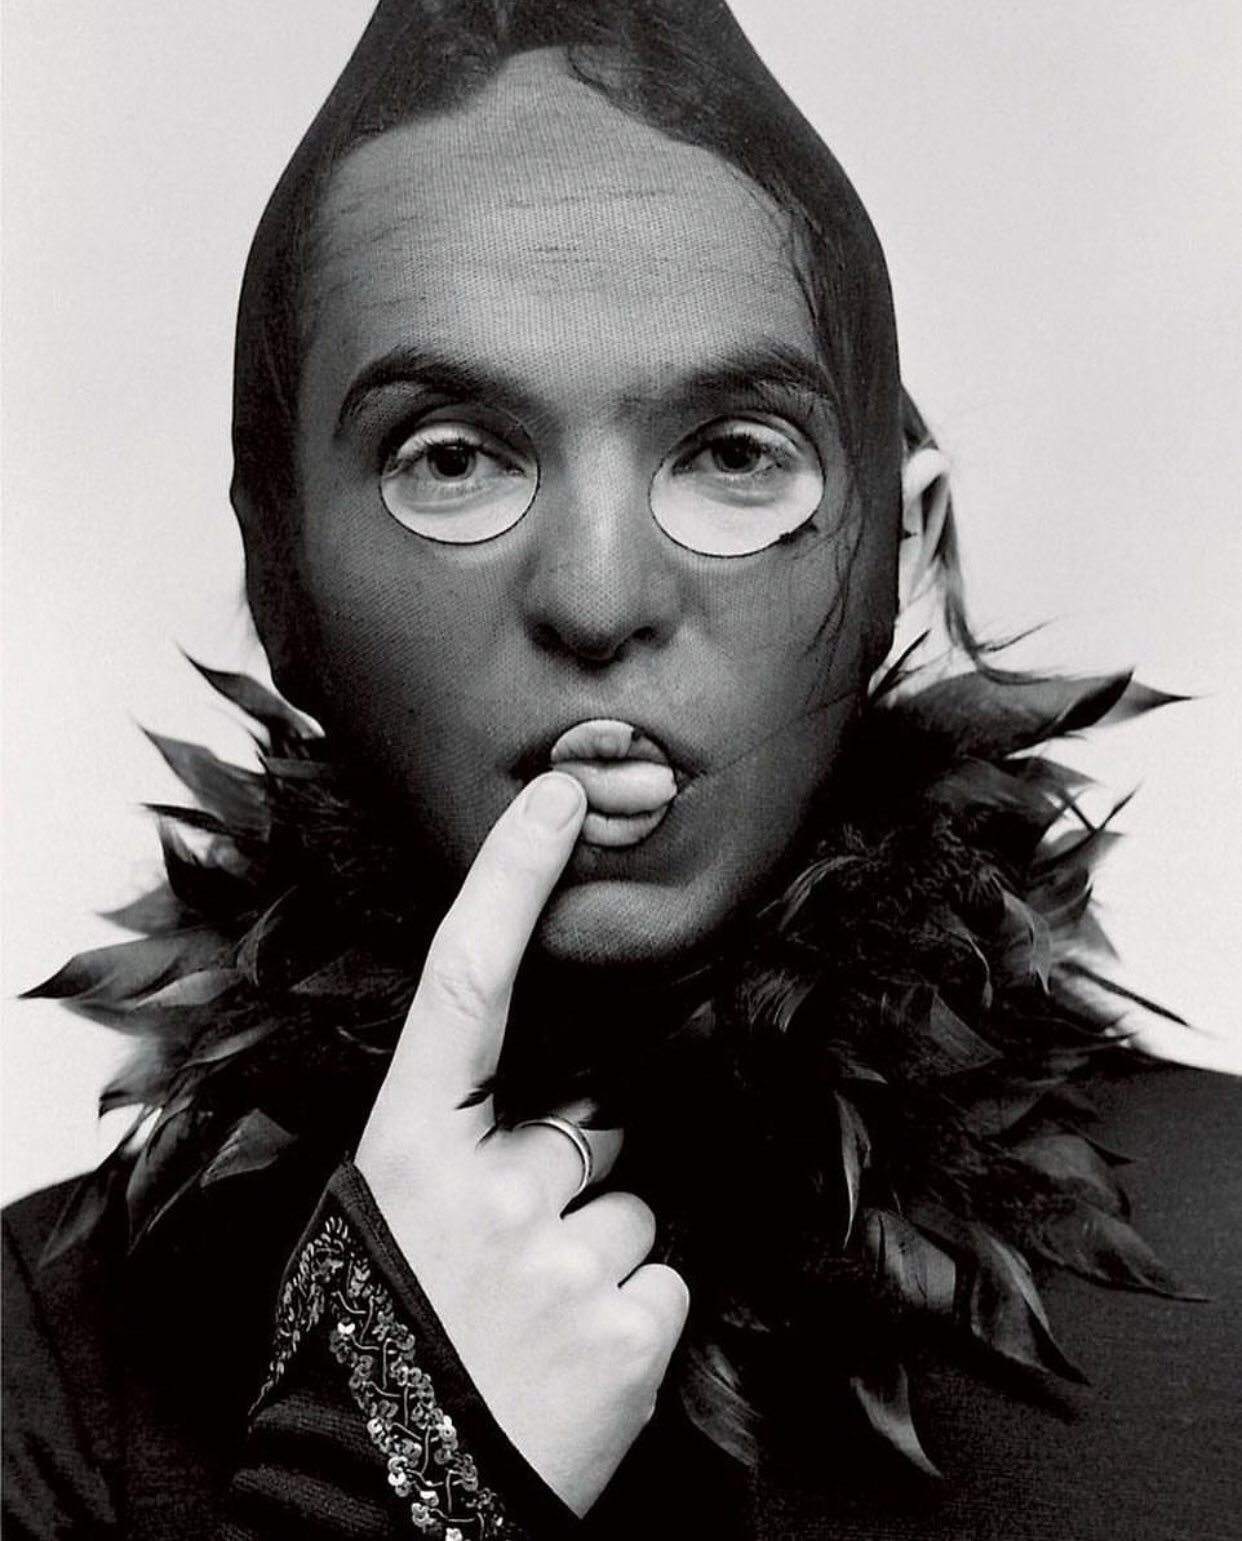 Happy birthday to the one and only Peter Gabriel 